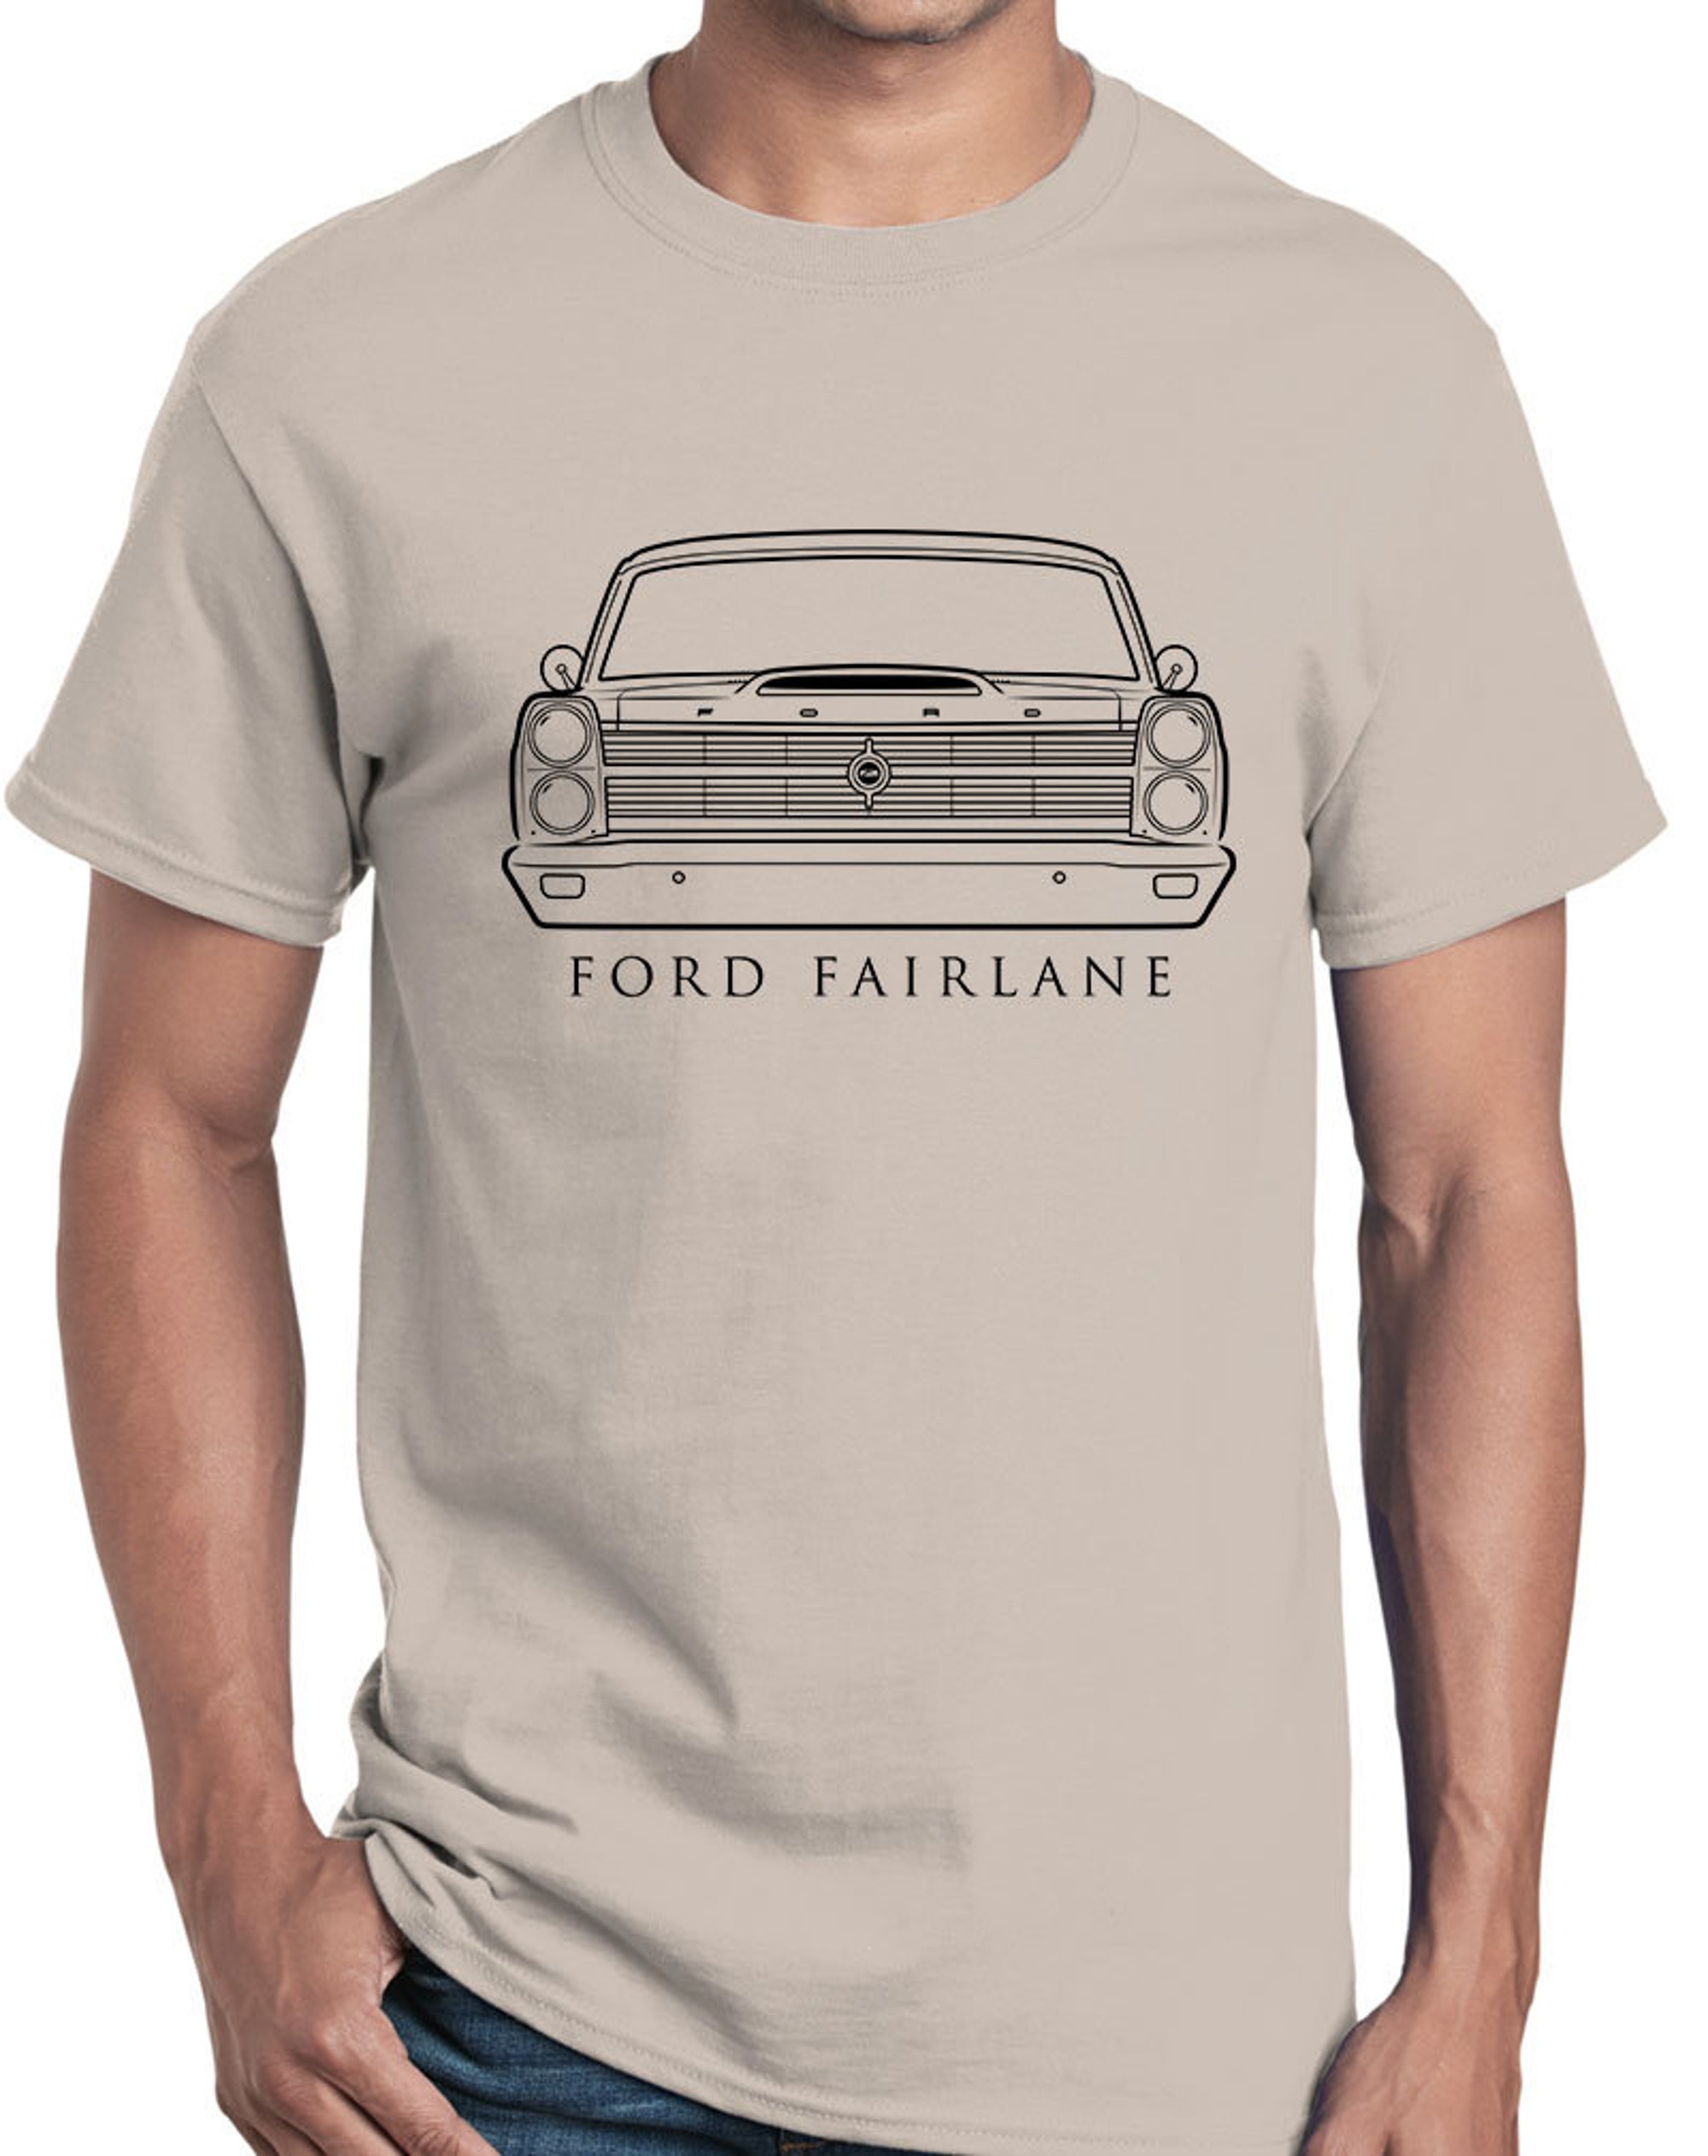 Discover 1966 Ford Fairlane T-Shirt